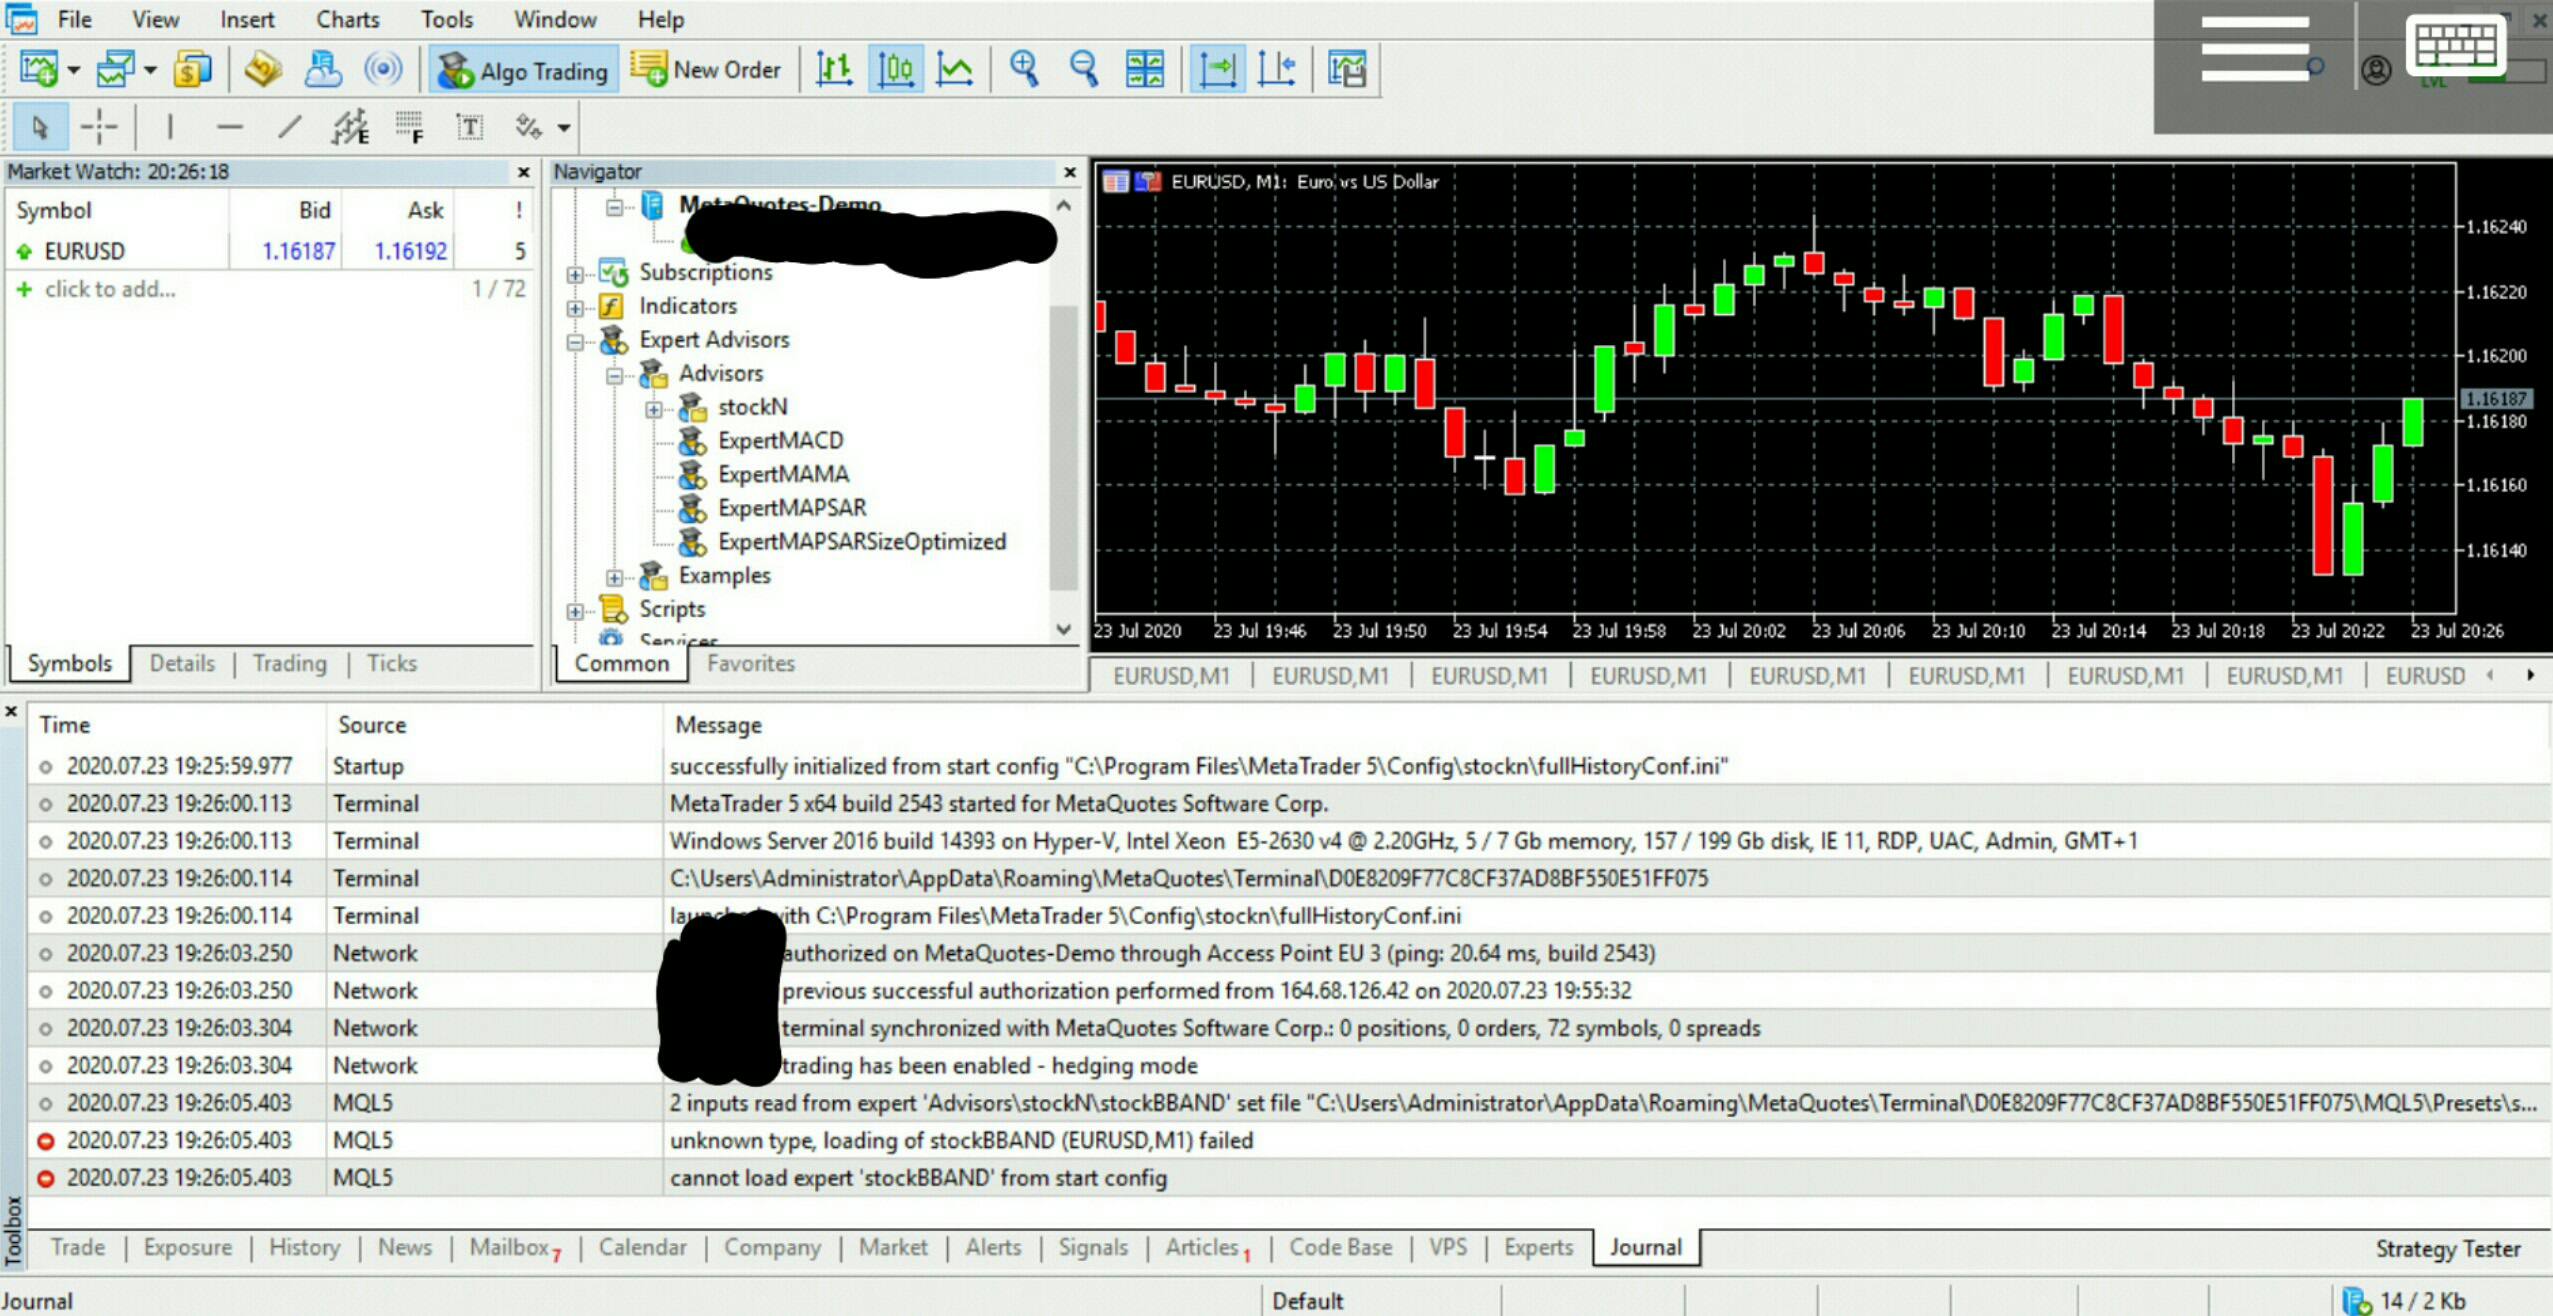 Mql5 oncalculate